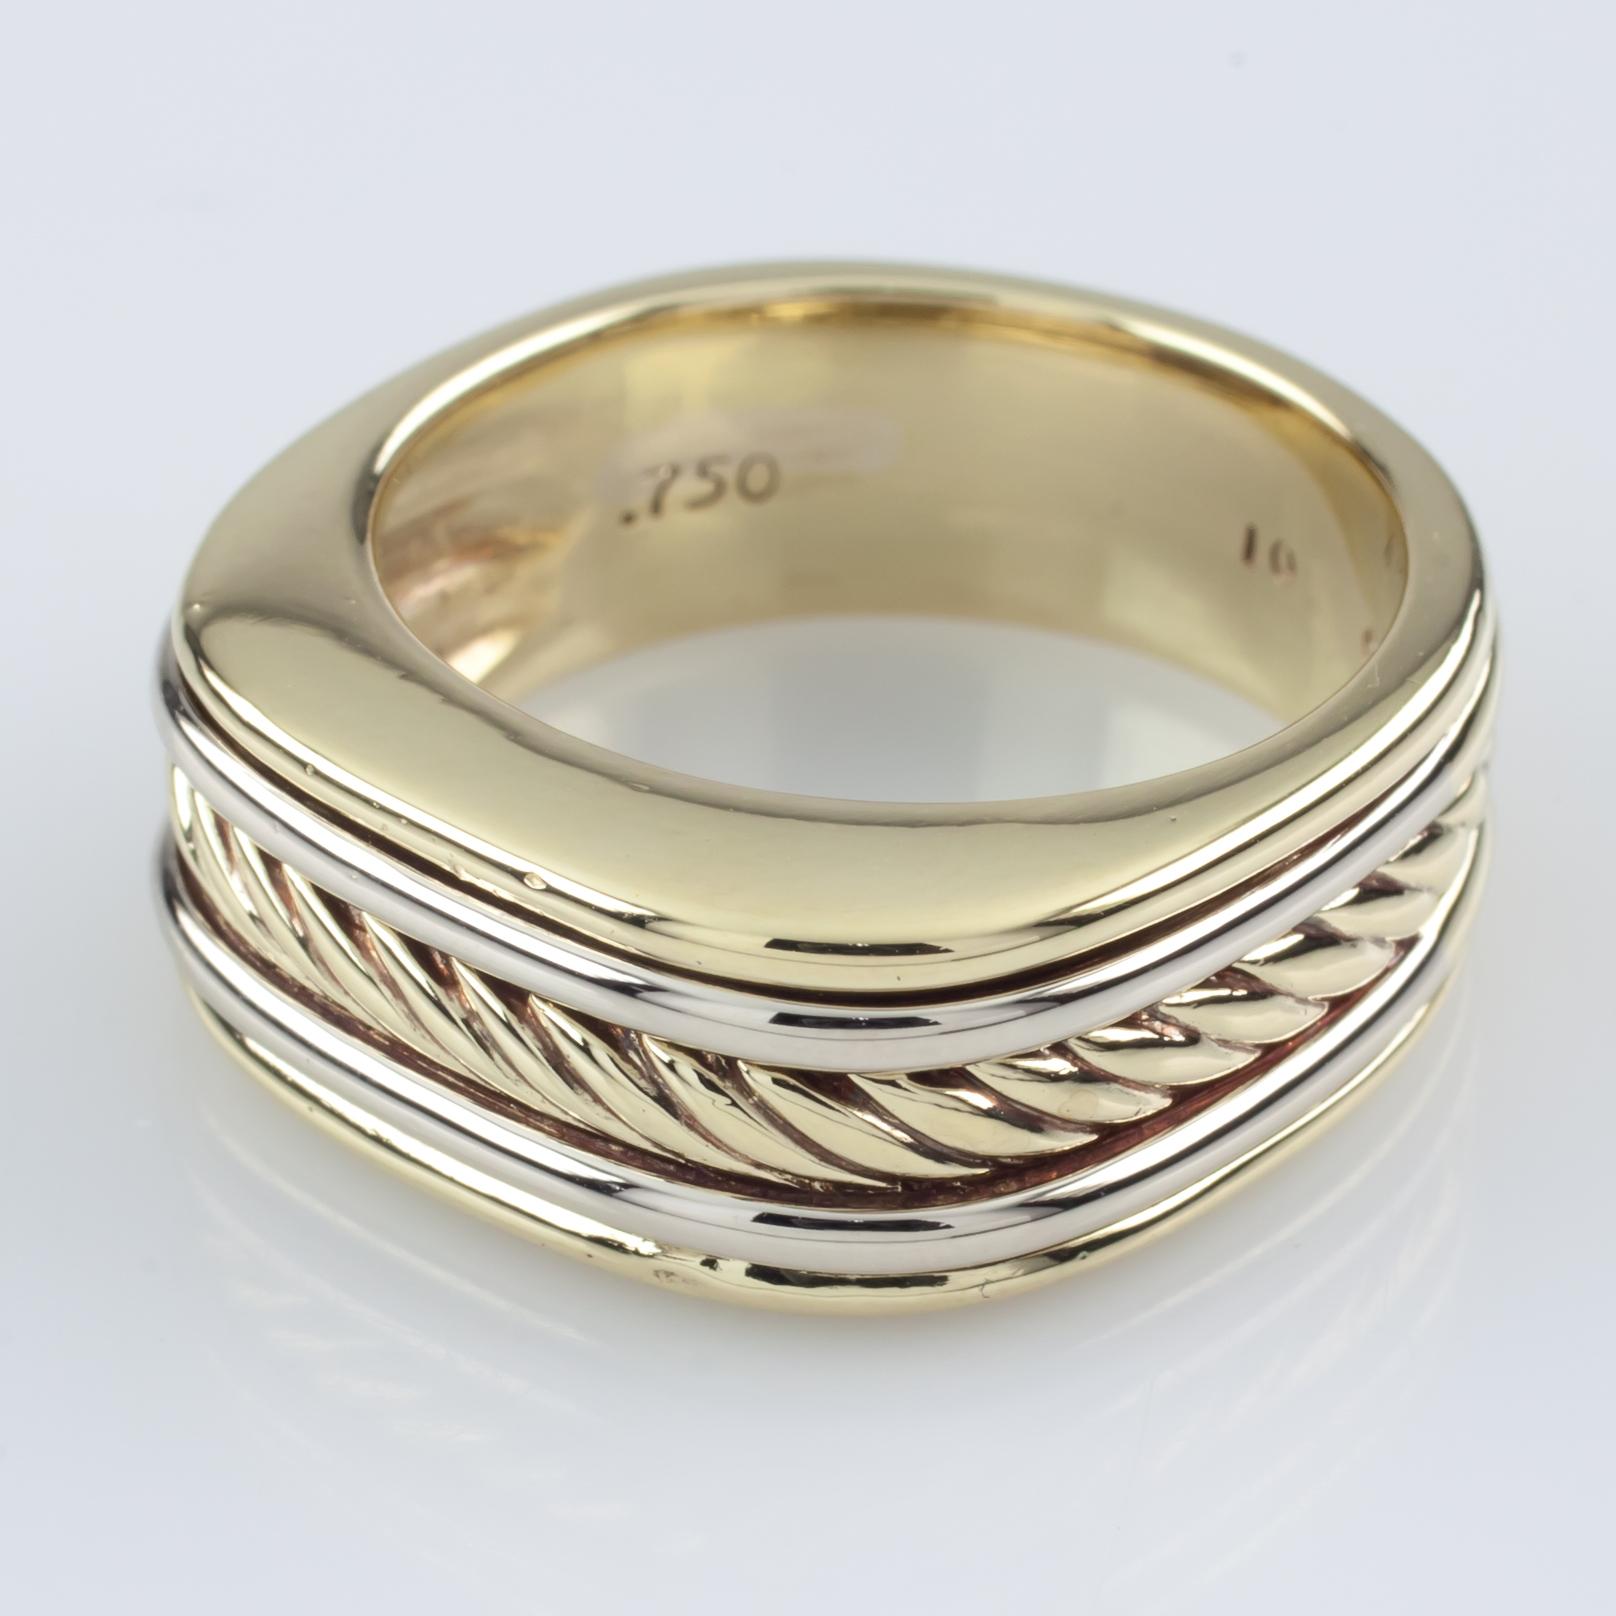 Gorgeous 18k White and Yellow Gold Thoroughbred Cigar Ring
Slightly Rounded Shoulders
Features White Gold Borders around Yellow Gold Center Cable
Width = 9 mm
Size = 9.75
Total Mass = 16.3 grams